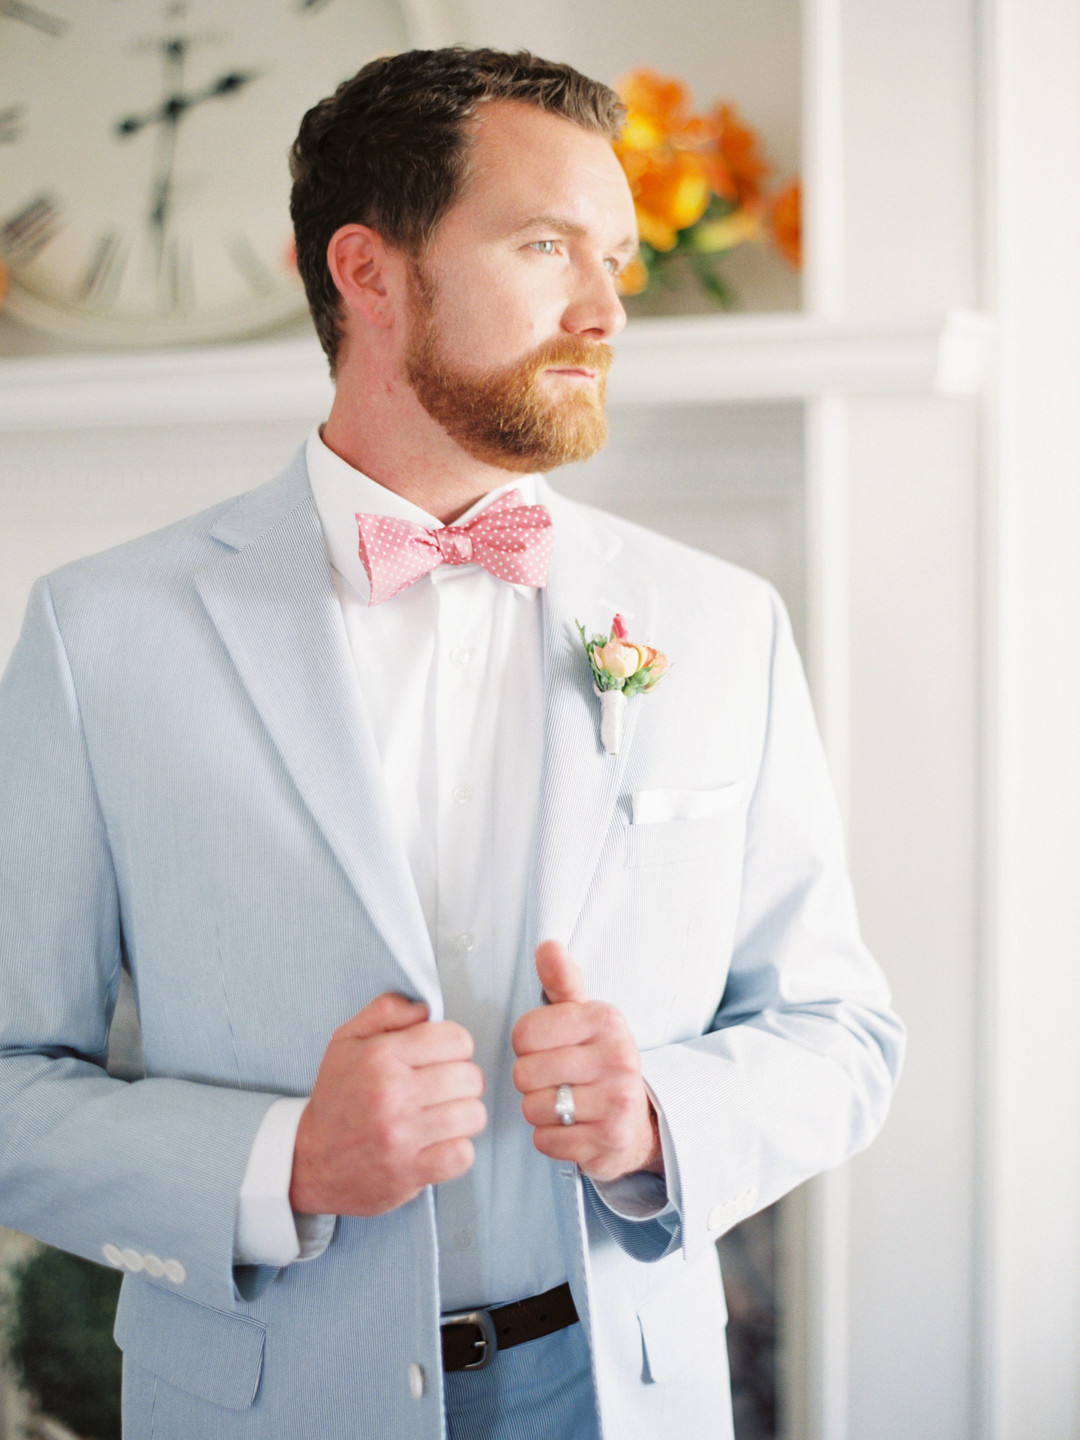 Summer citrus wedding inspiration at historic post office LGBTQ+ weddings two grooms gay wedding blue suit white gray suit orange blue bright colorful summery styled shoot